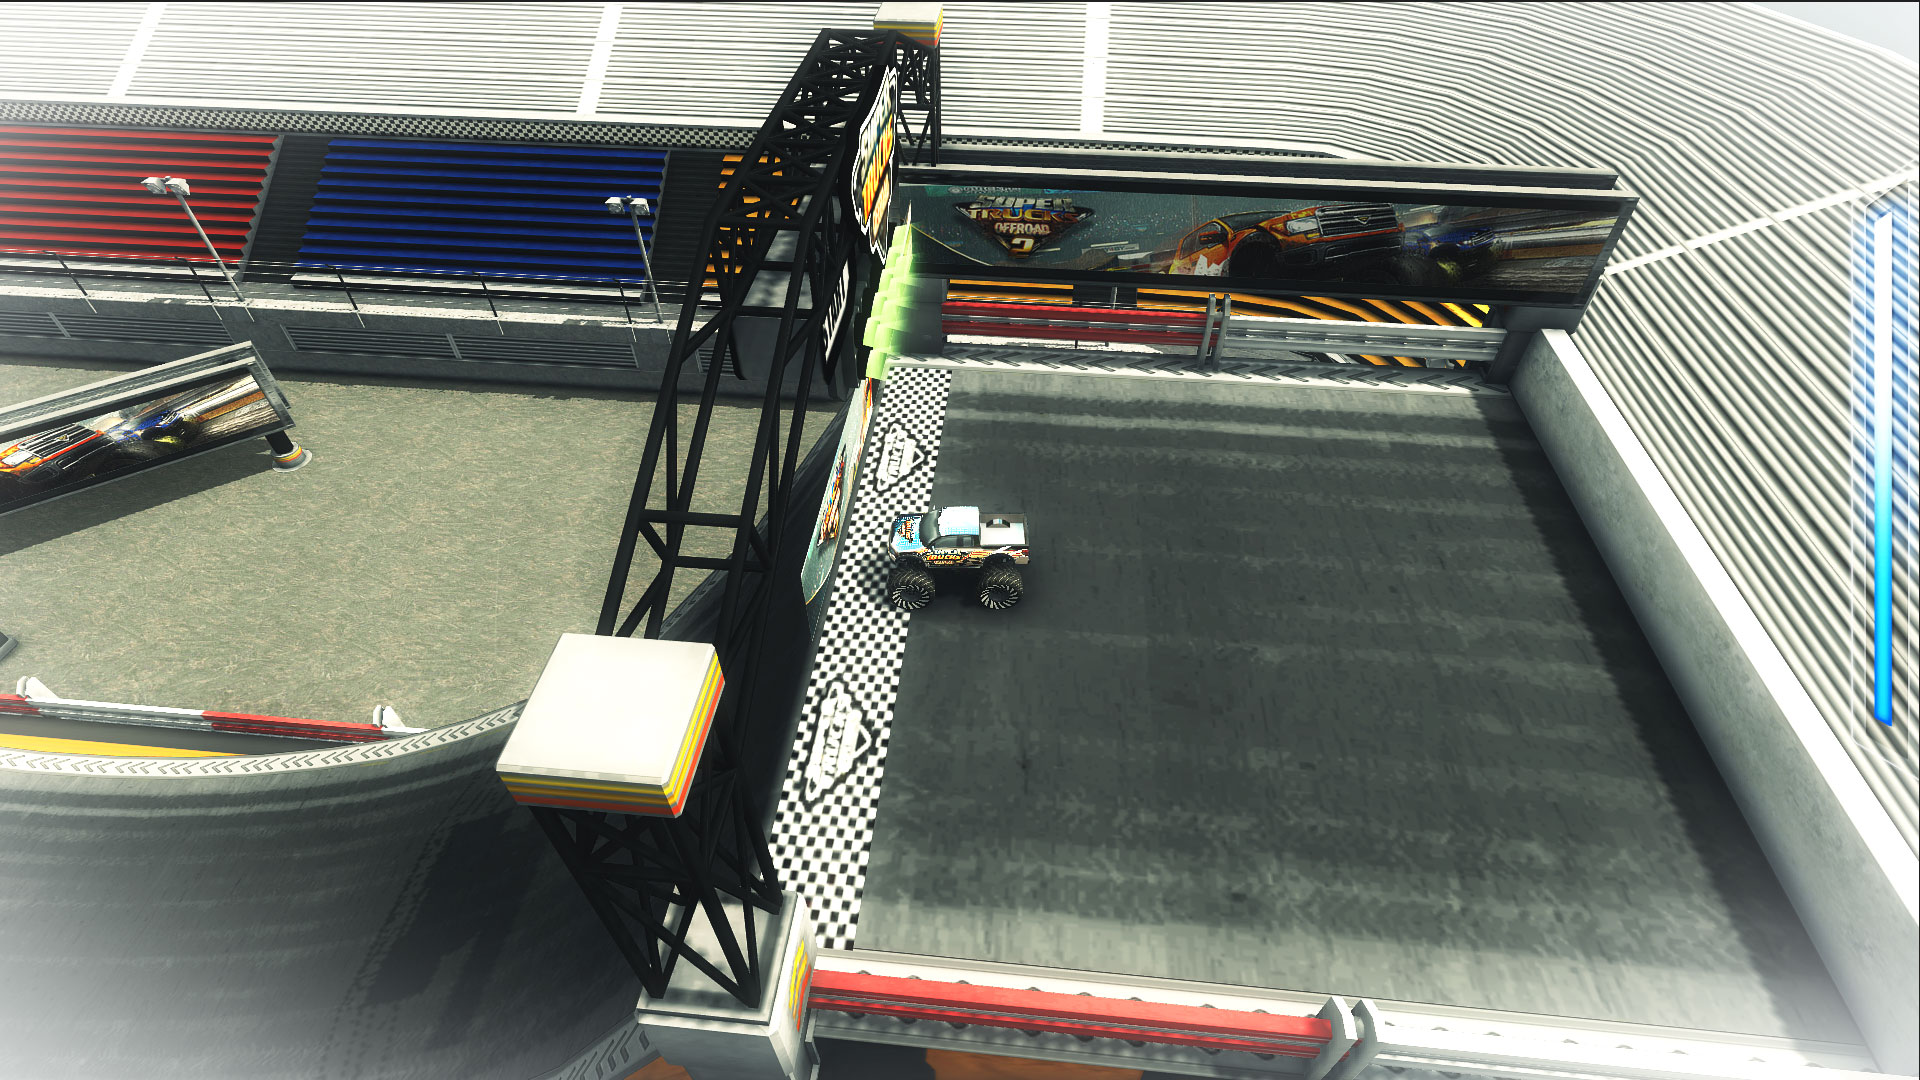 SuperTrucks Offroad Racing for Android